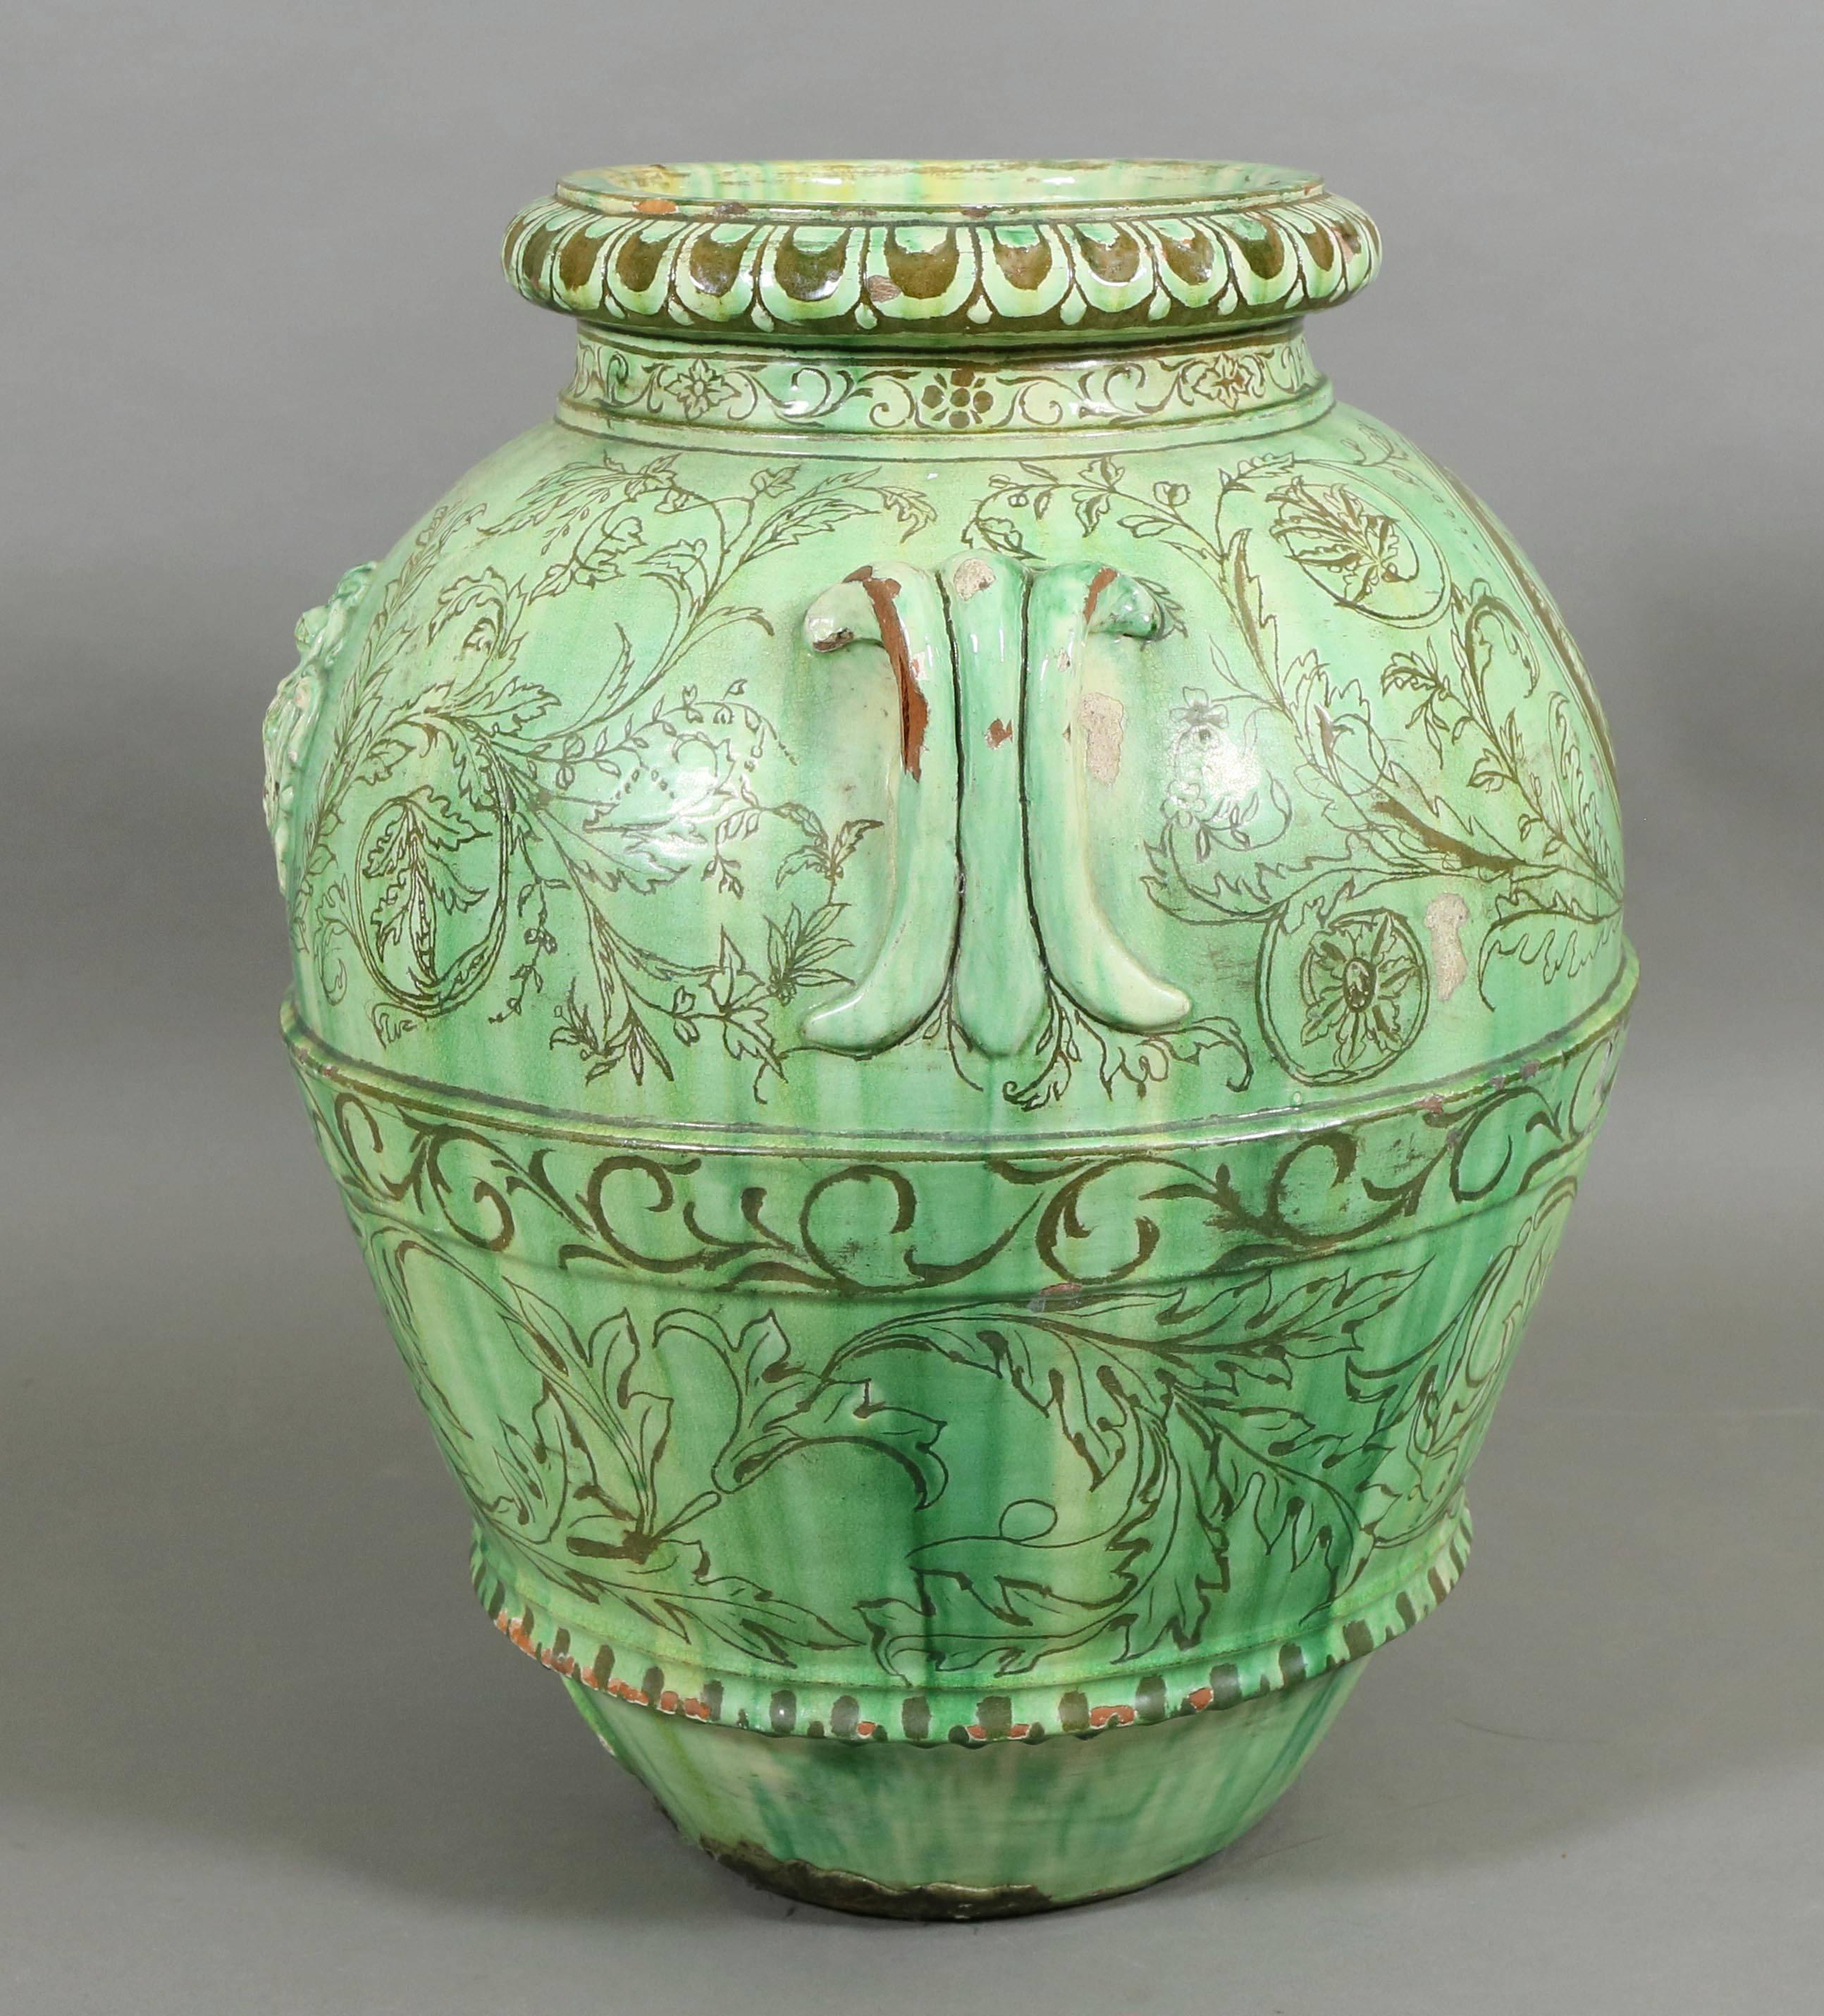 Blueish green glaze, baluster form with cartouche on one side and gargoyle face on reverse. Signed Maria on side. Featured in the movie Knives Out.